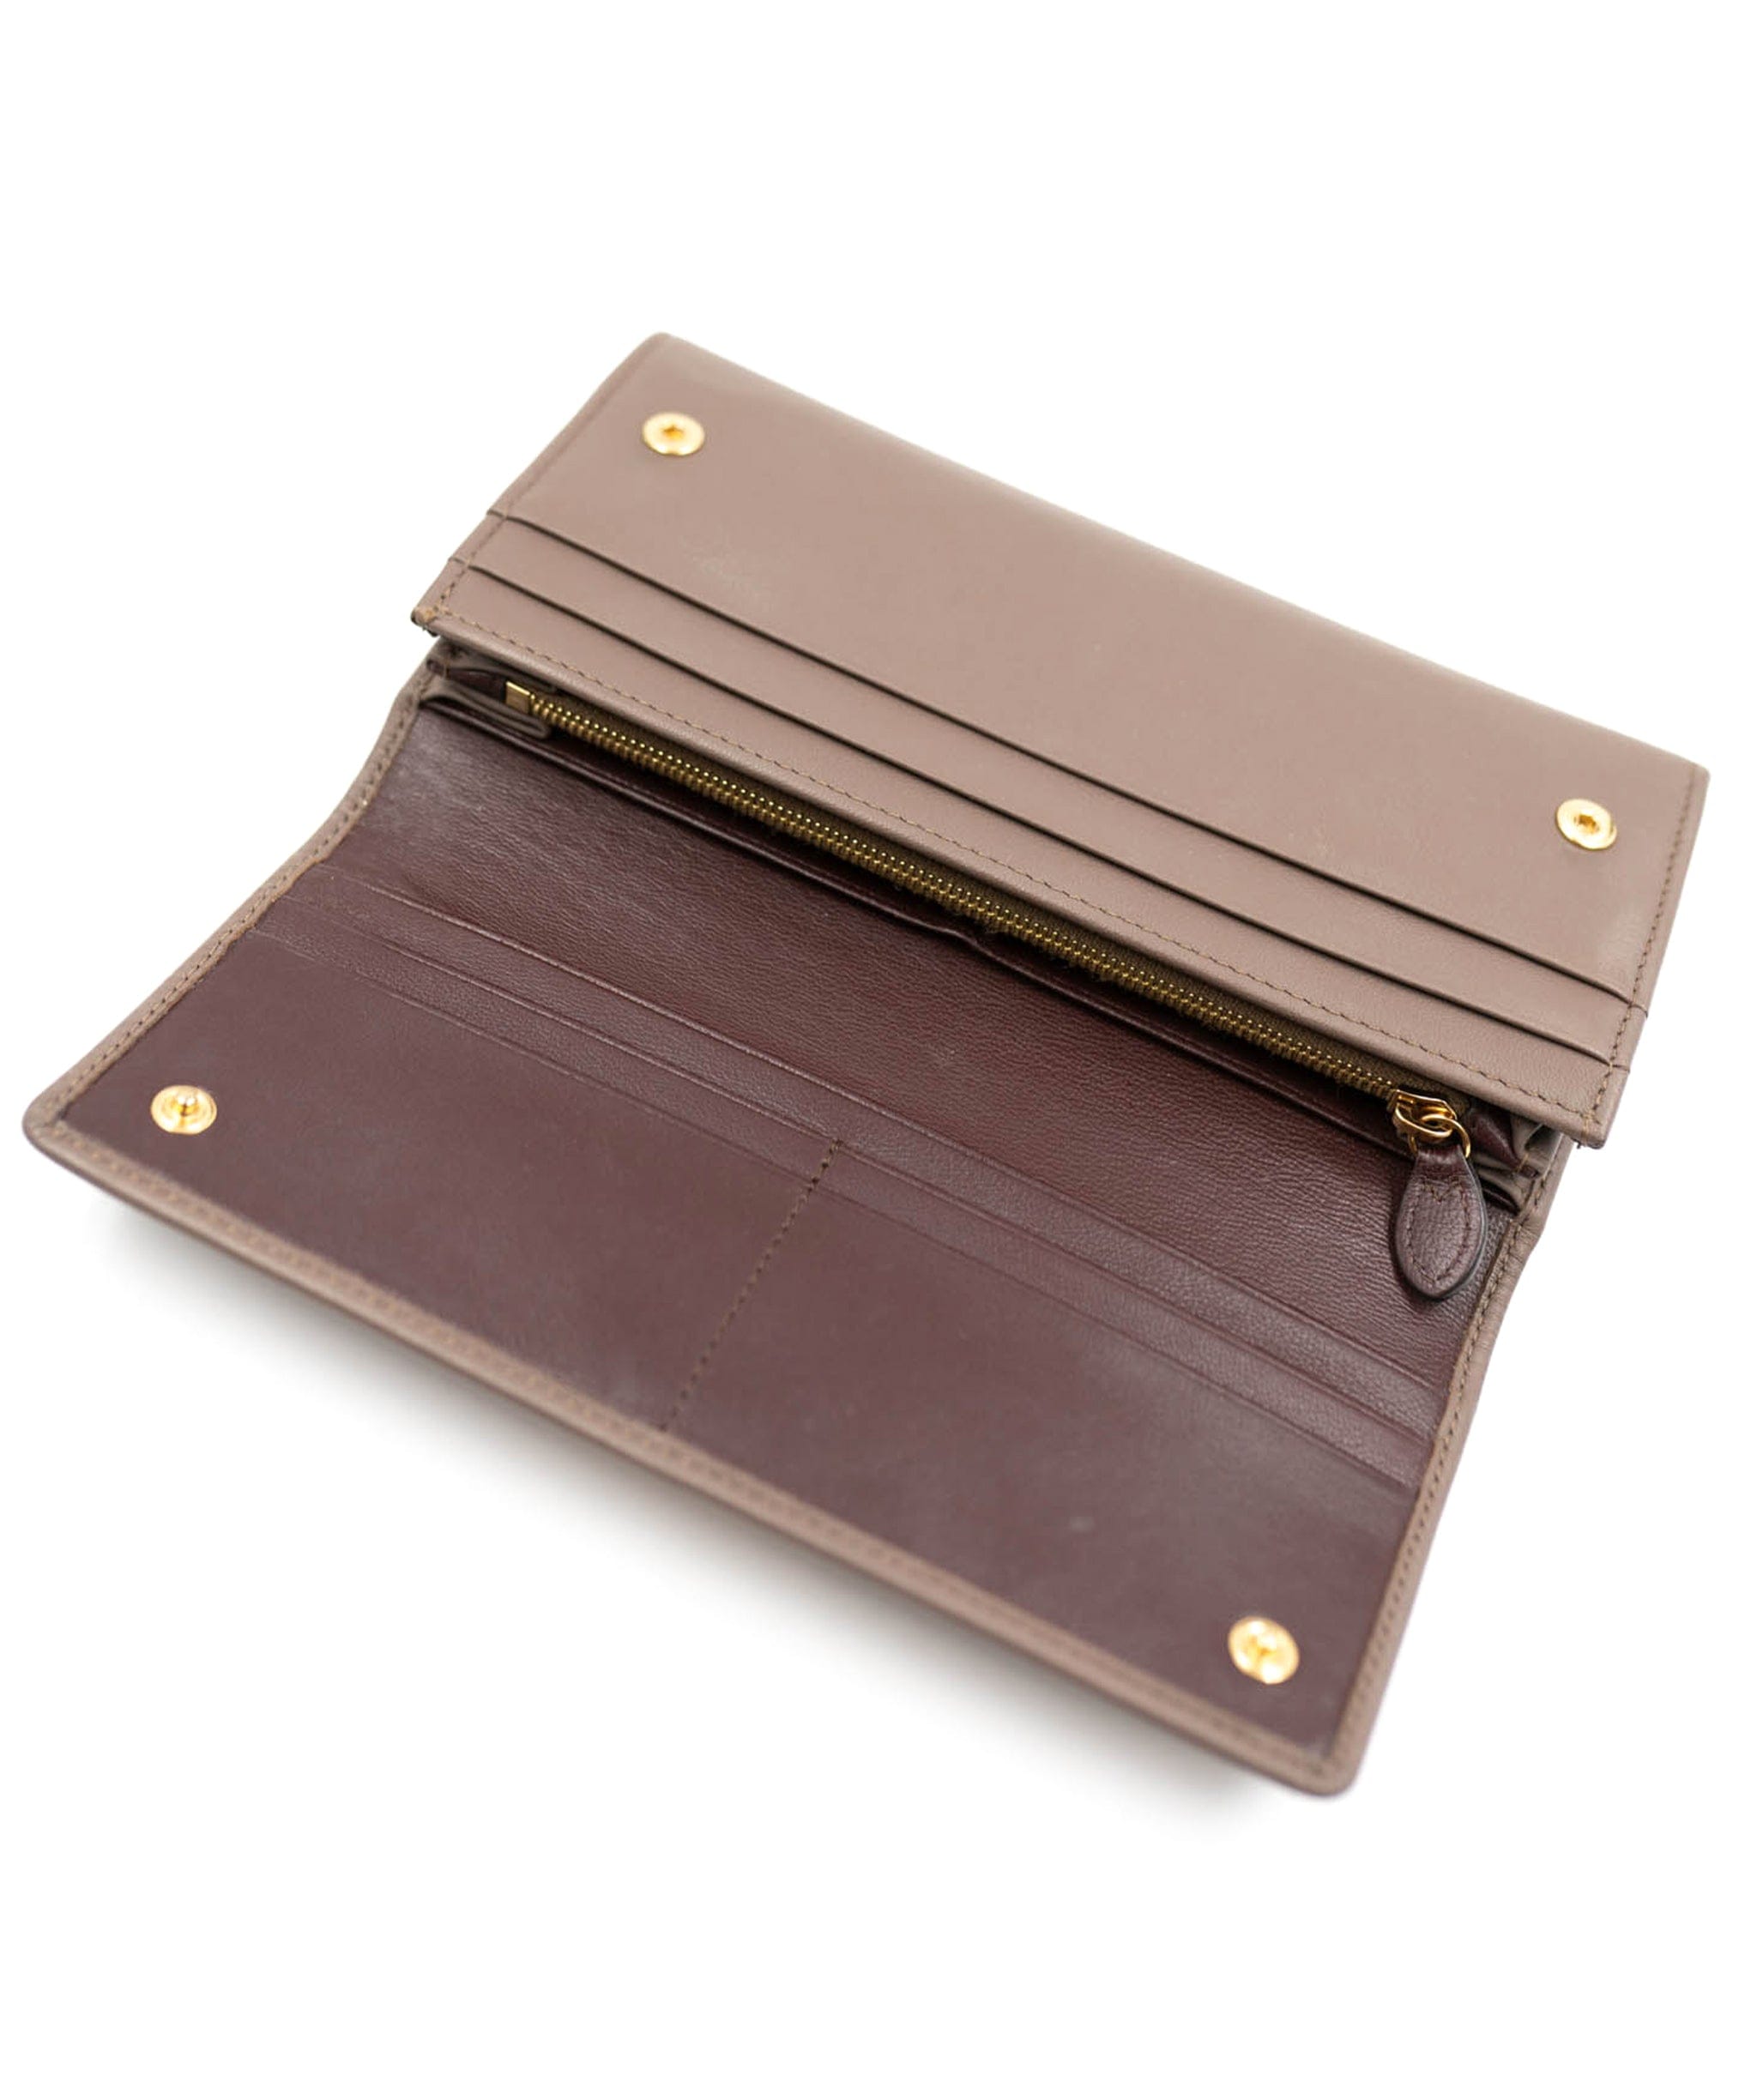 Mulberry Mulberry taupe continental wallet  - AGL2011